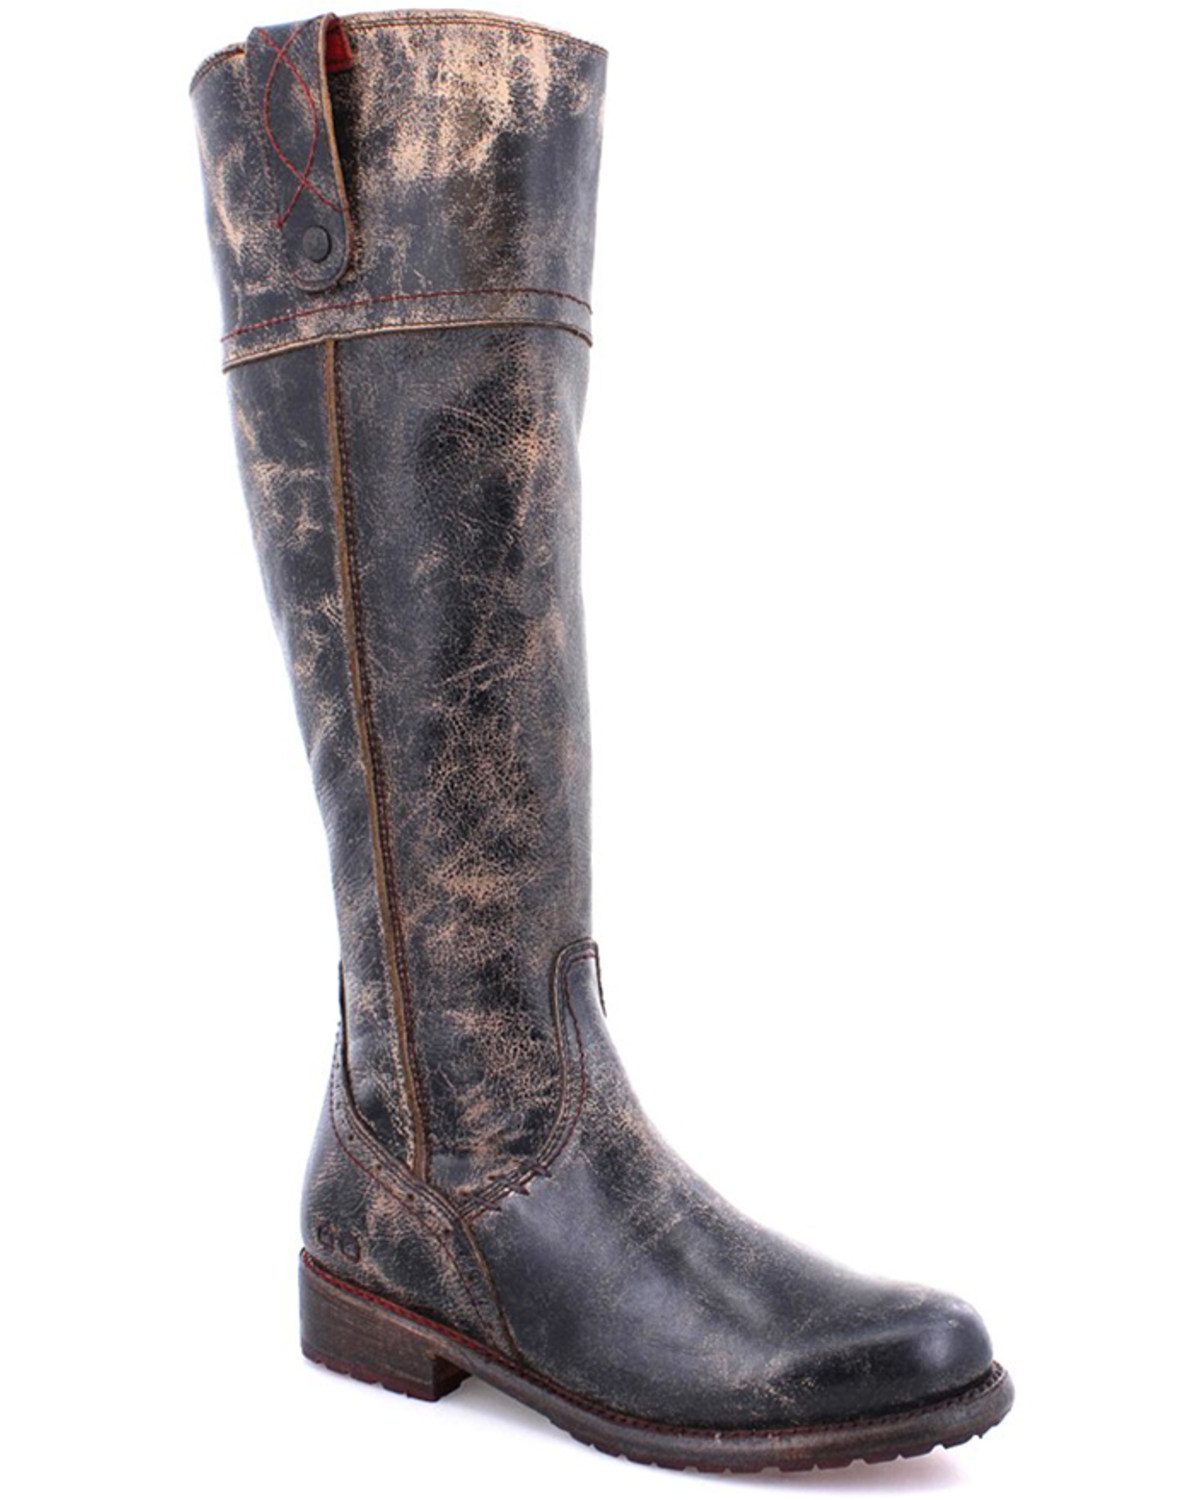 Bed Stu Women's Jacqueline Tall Riding Boots - Round Toe